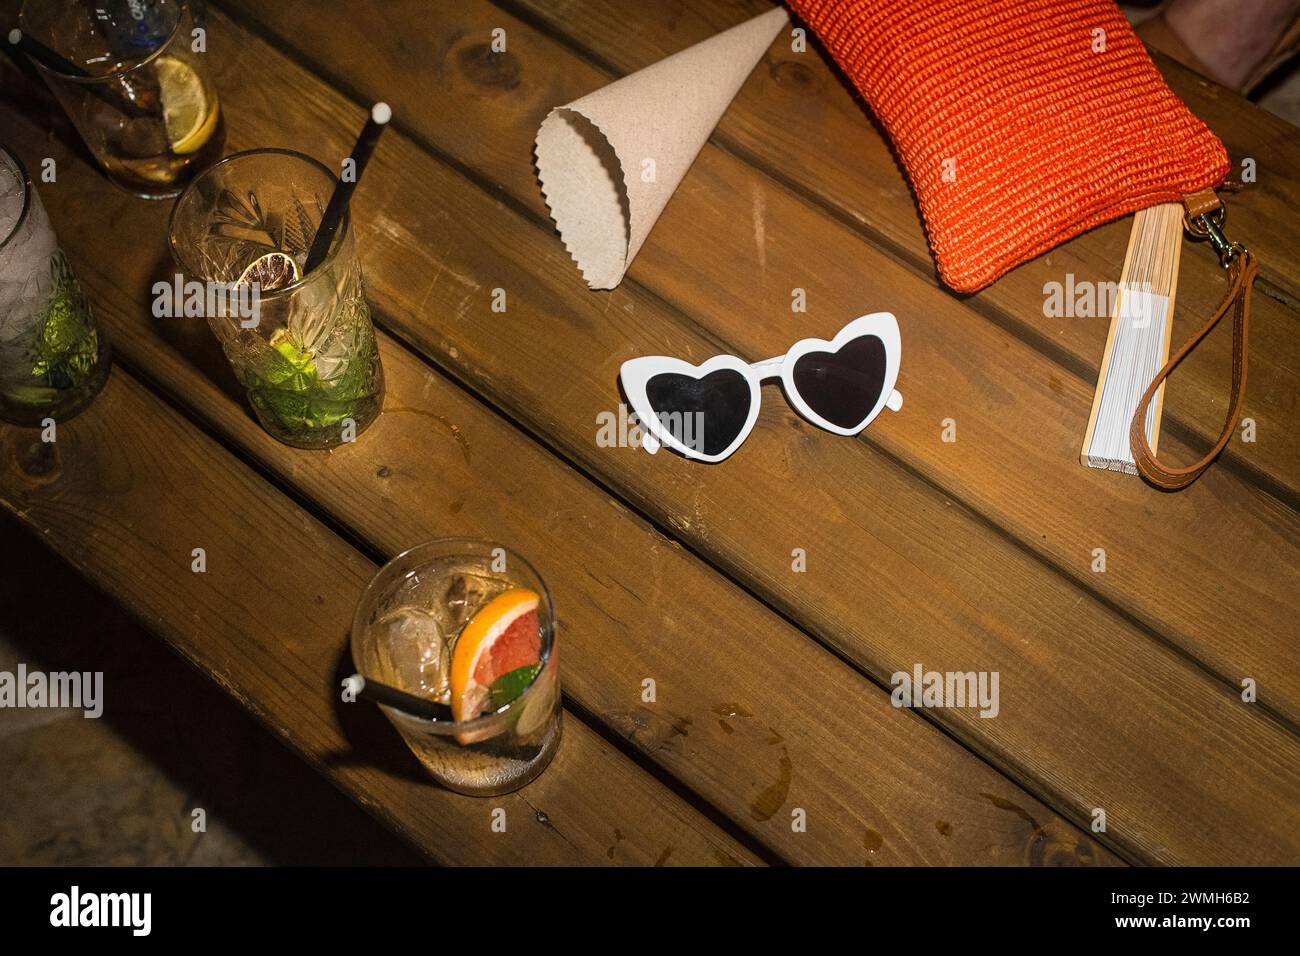 Heart shaped Sunglasses and drinks on bench Stock Photo